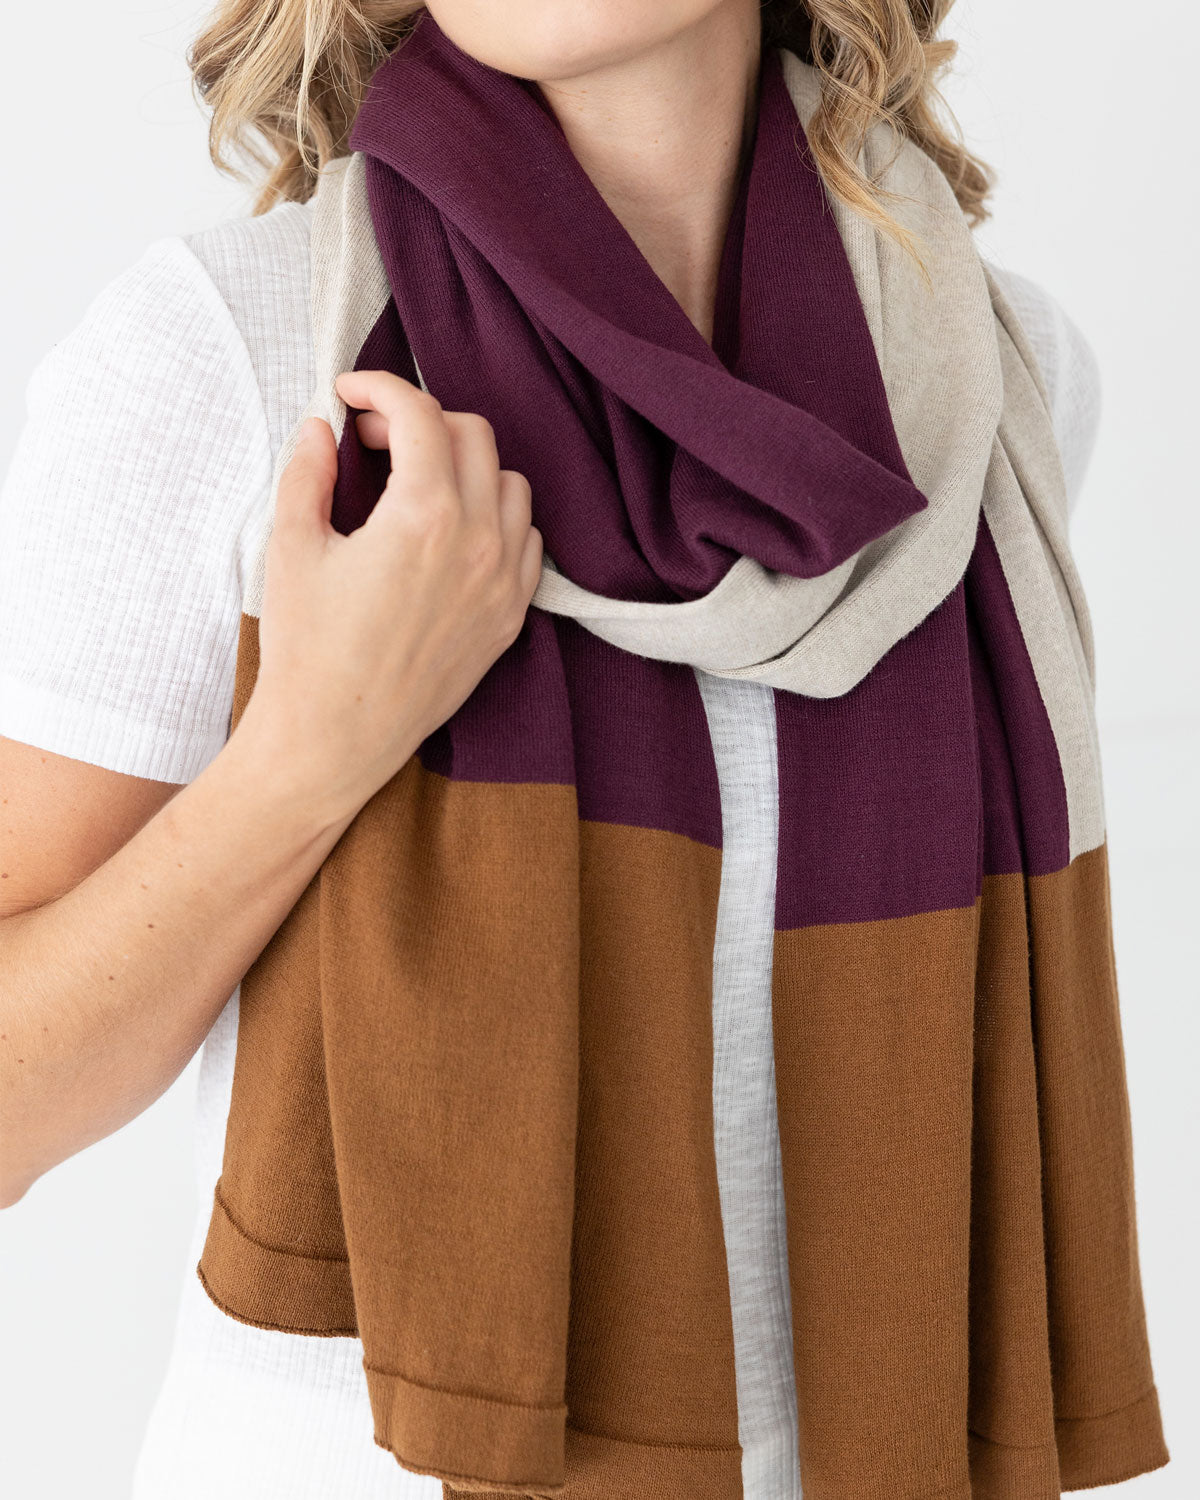 The Dreamsoft Travel Scarf - Mulberry Colorblock